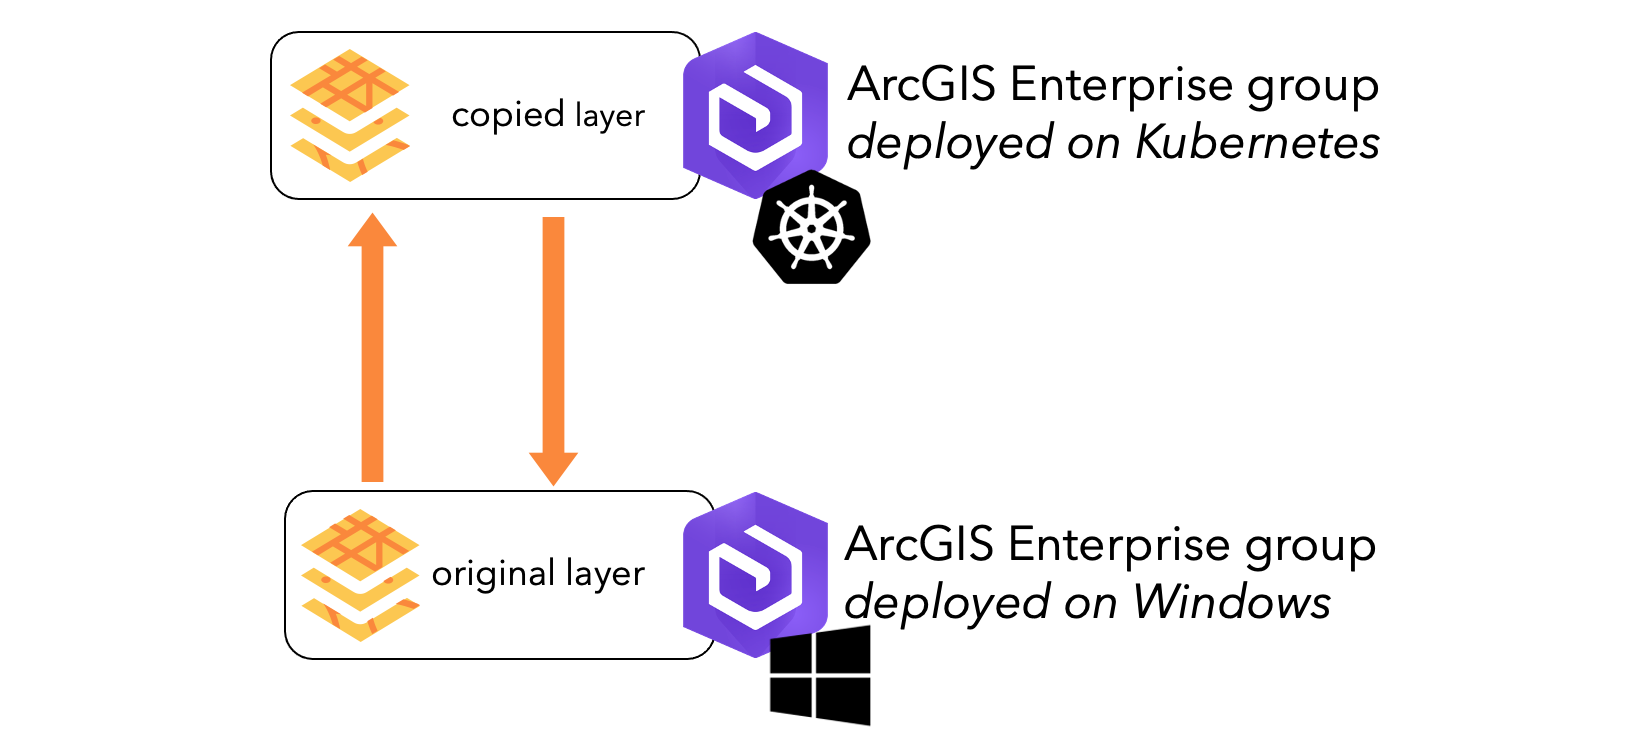 Diagram of how content can be shared between ArcGIS Enterprise on Windows/Linux and Kubernetes through distributed collaboration.